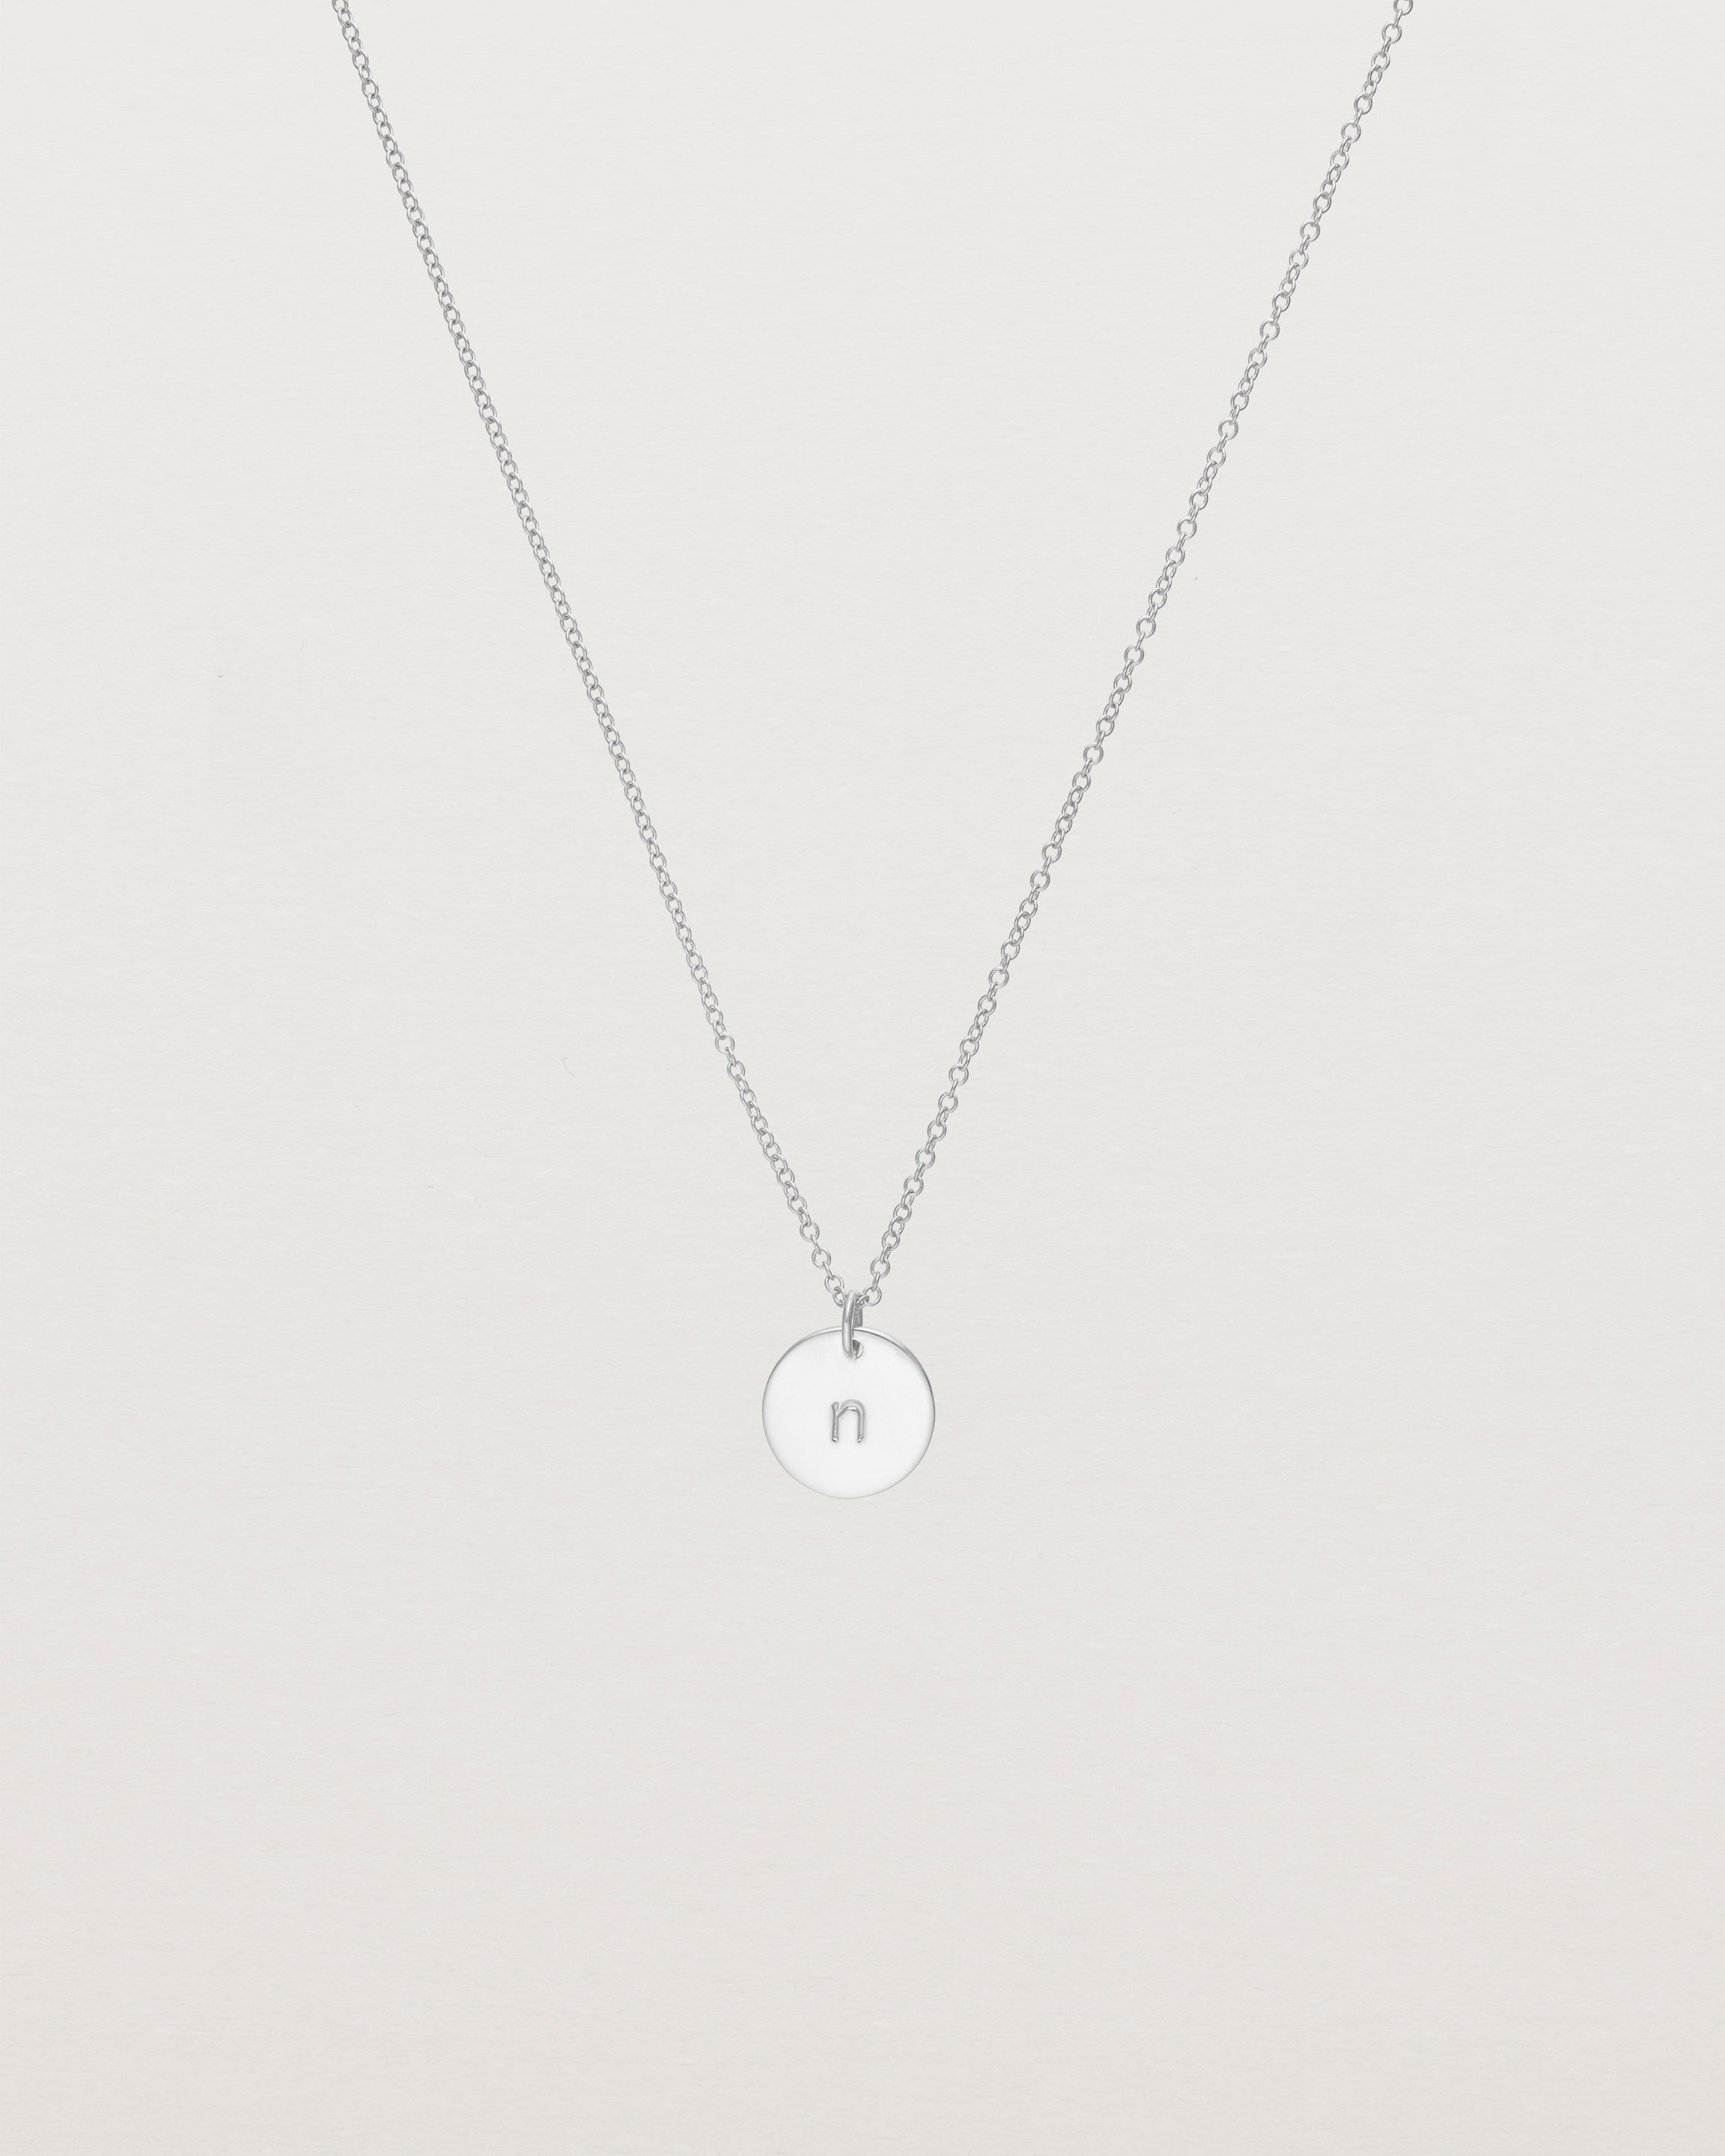 Front view of the Mini Initial Necklace in Sterling Silver.